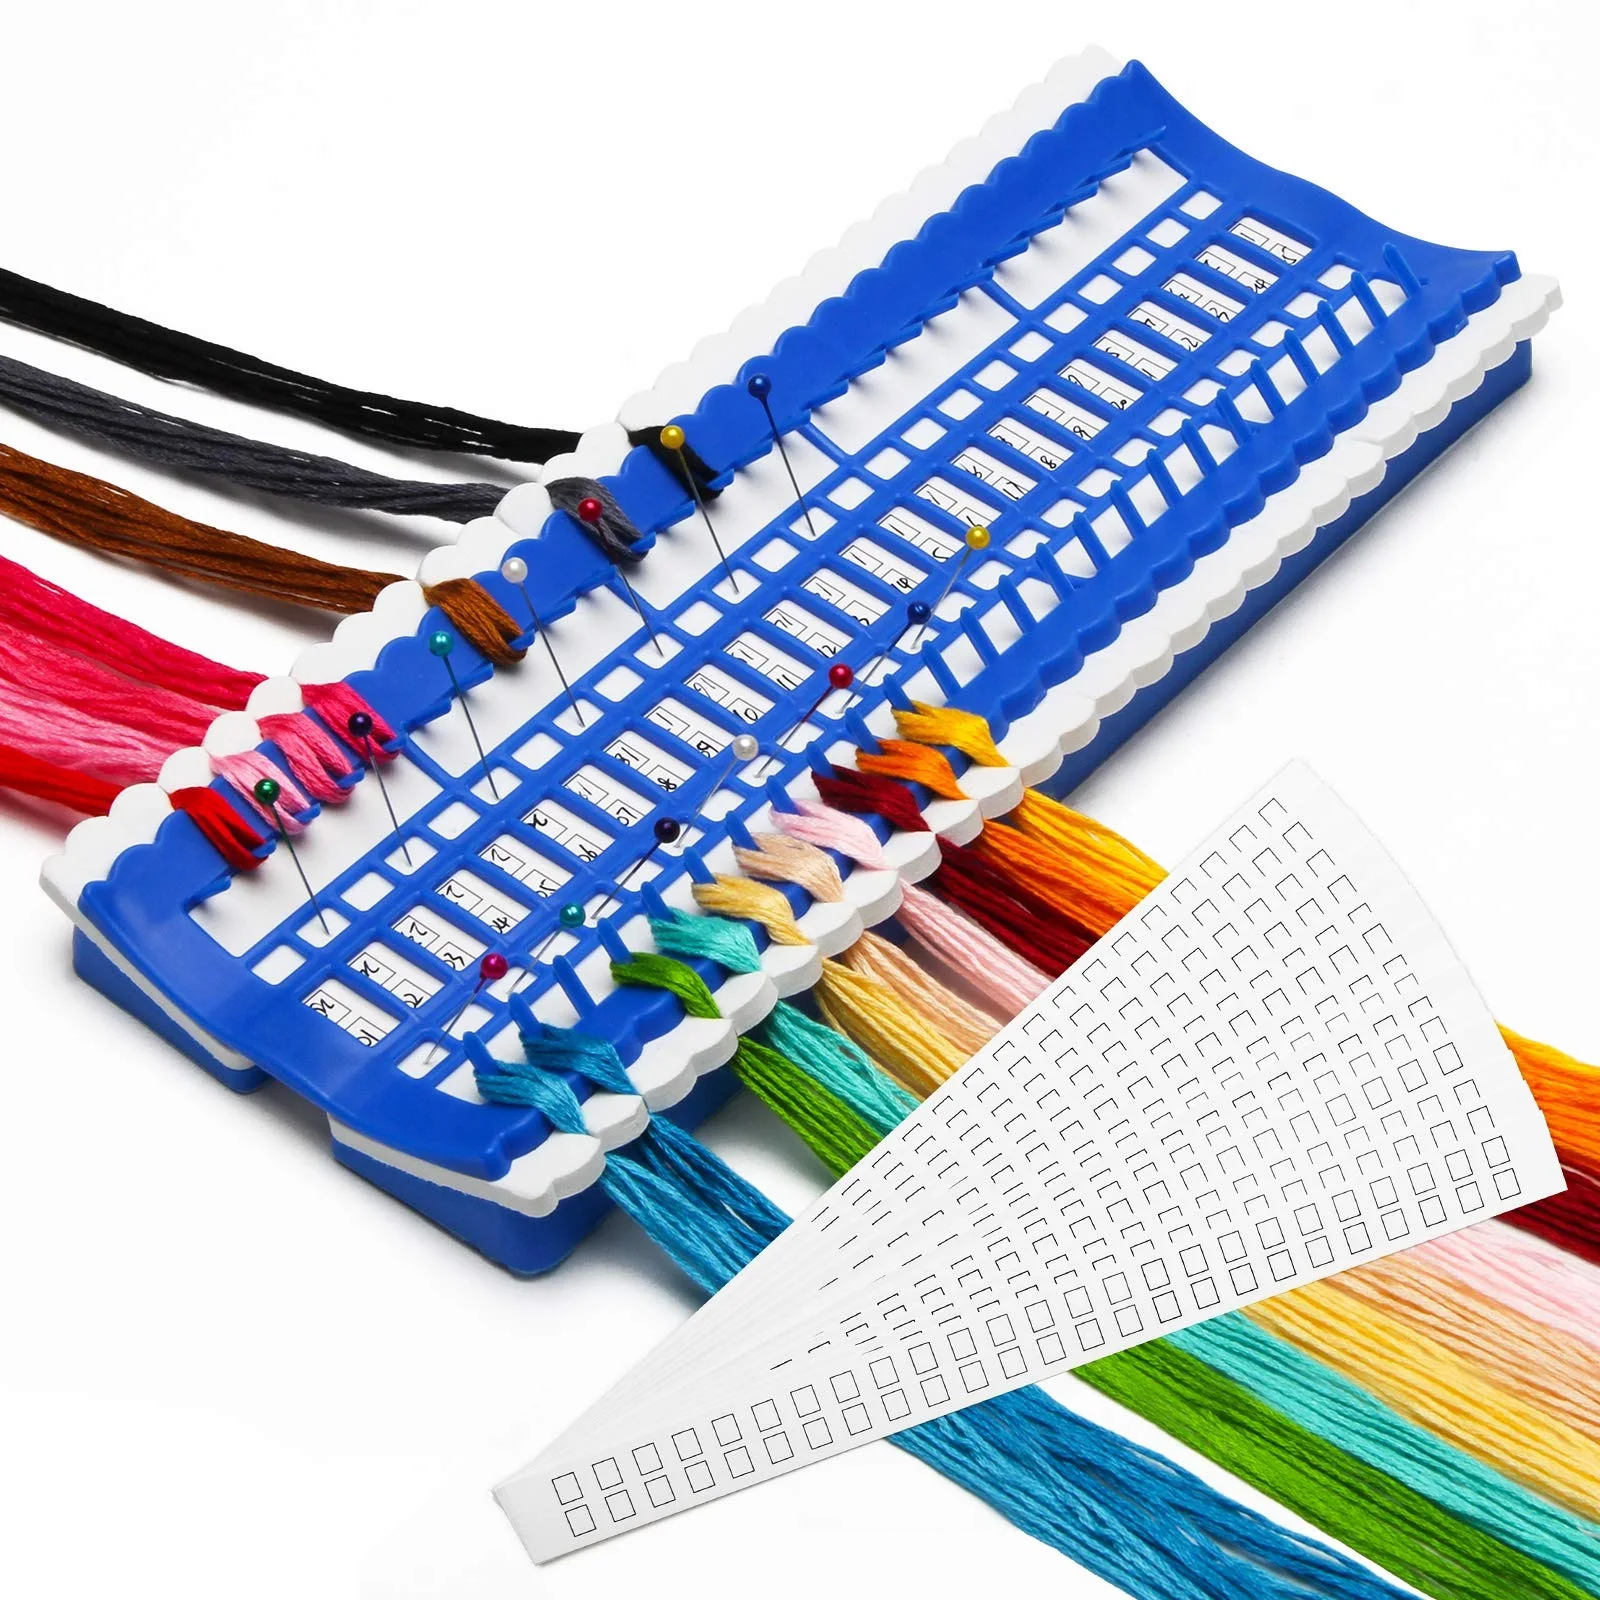 30 Positions Thread Organizer Sewing Tools DIY Cross Stitch Row Line Tool Sewing Needles Holder Embroidery Floss Sewing Supplies